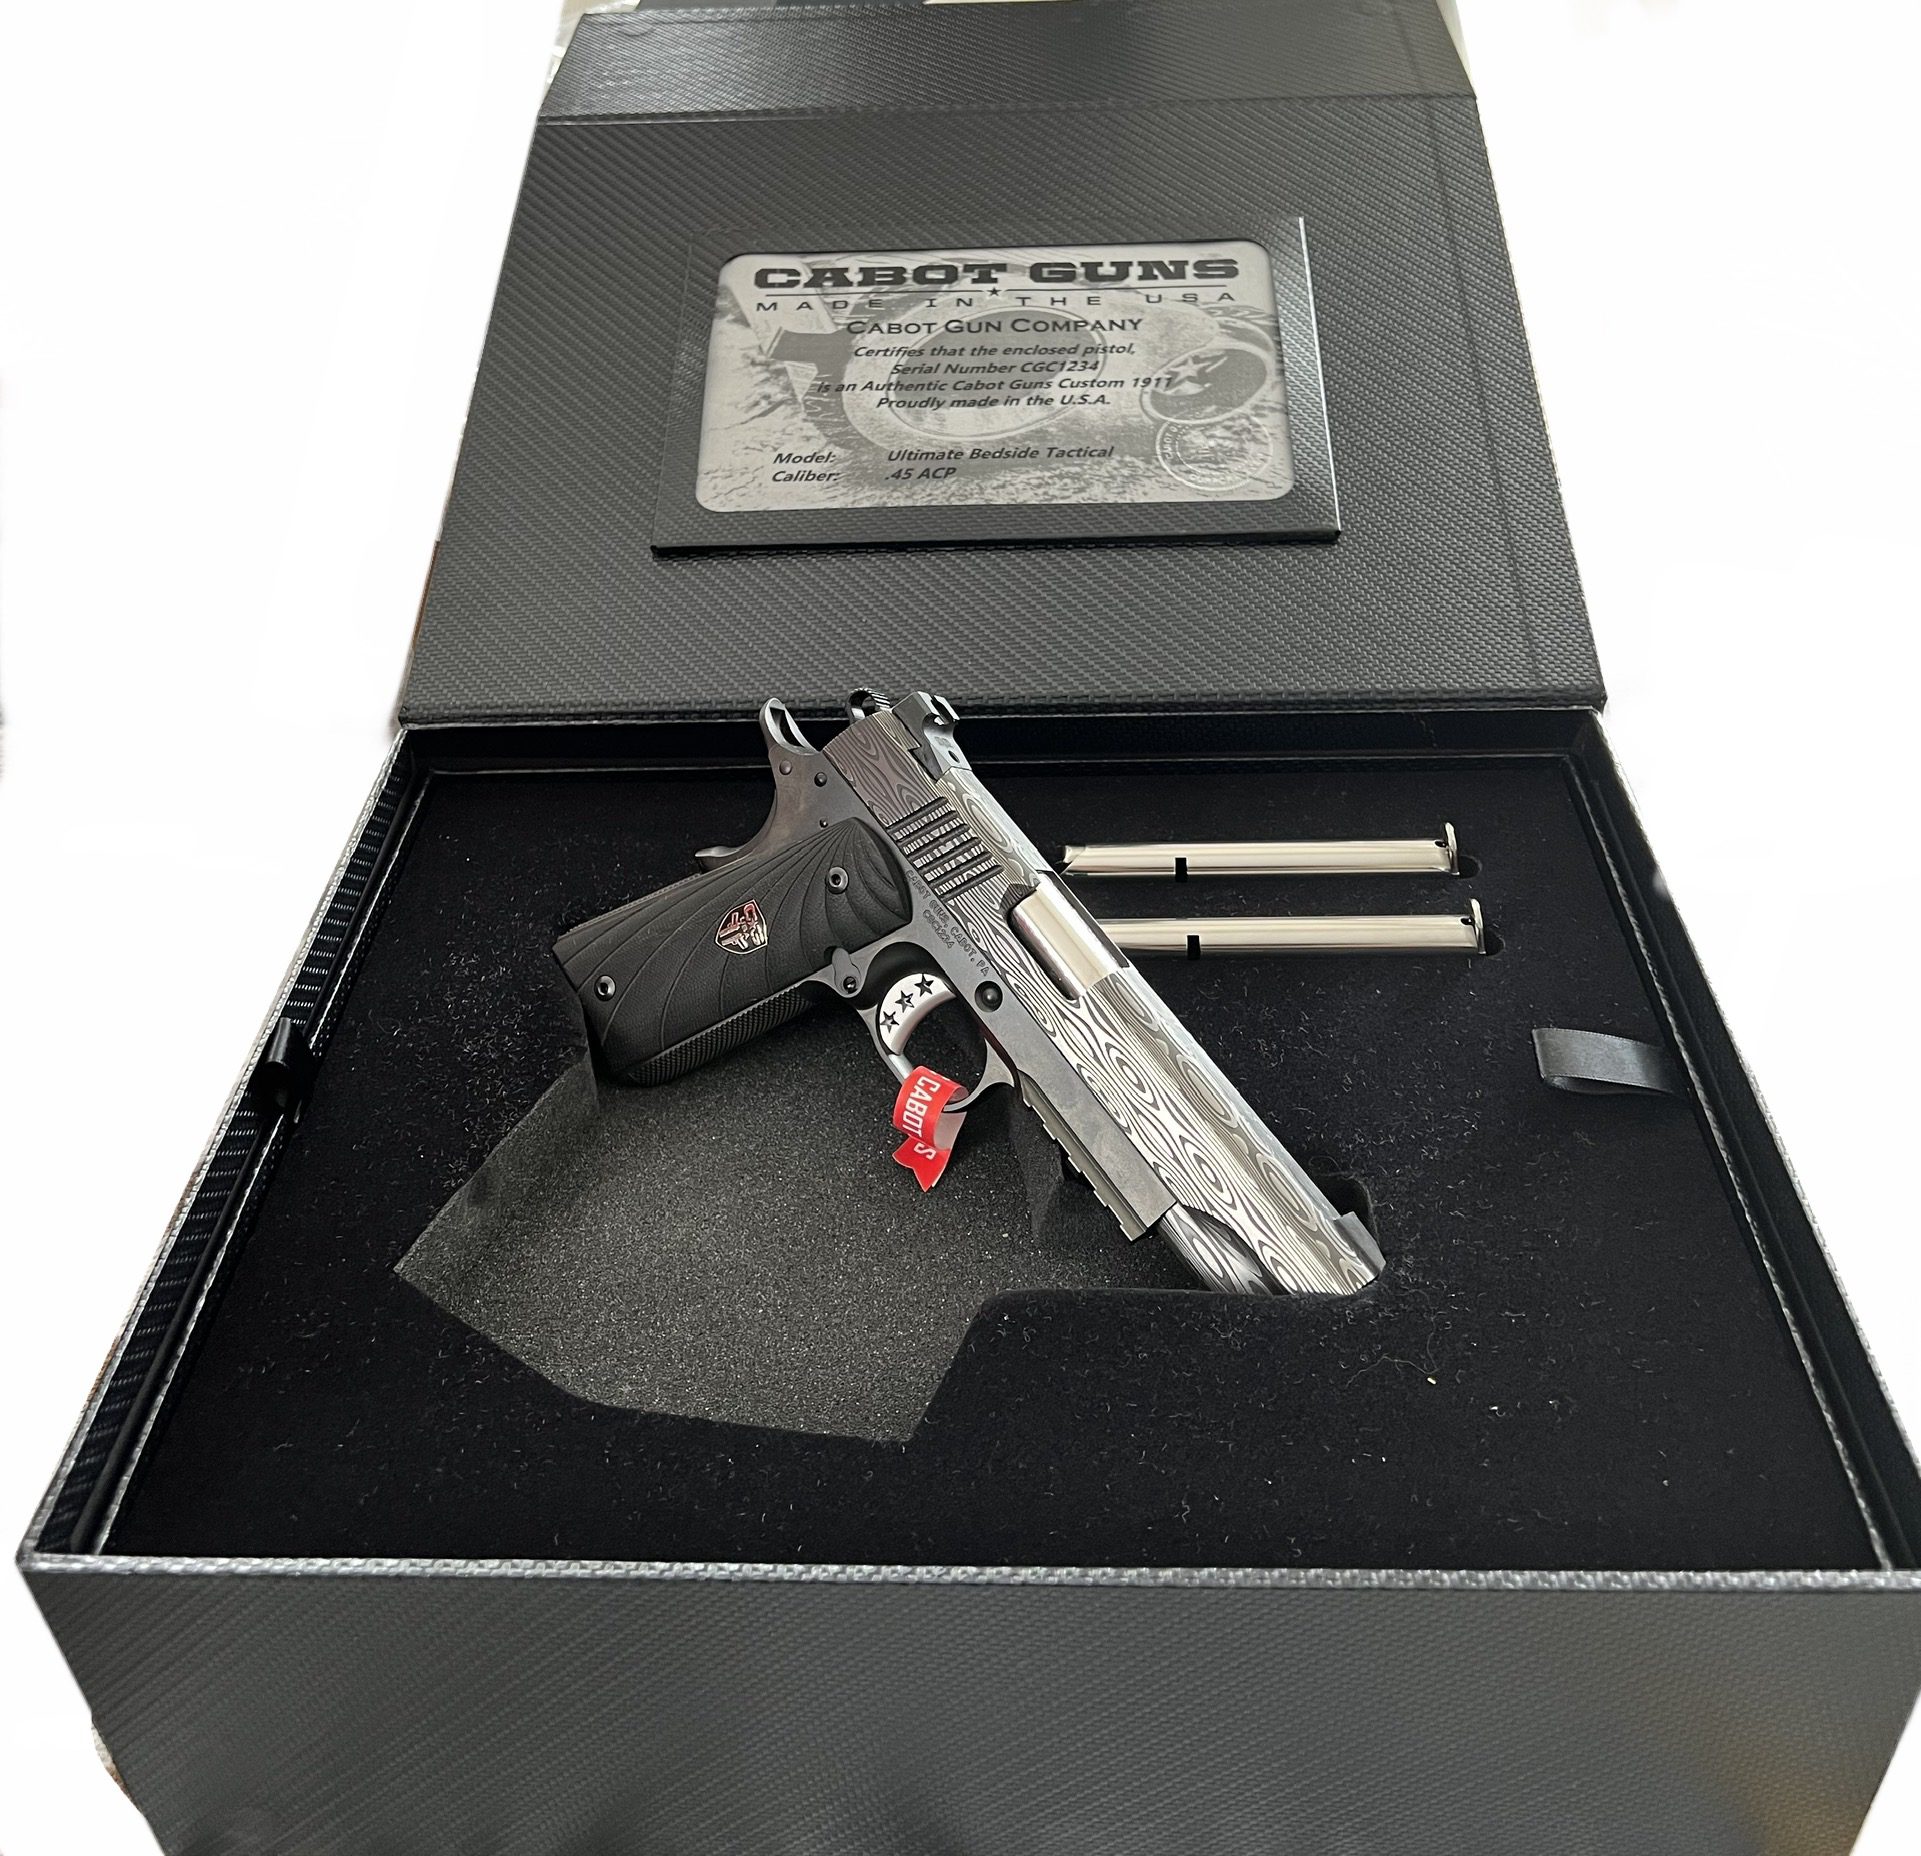 Cabot’s Ultimate Bedside Tactical 1911 (CGC 1234)